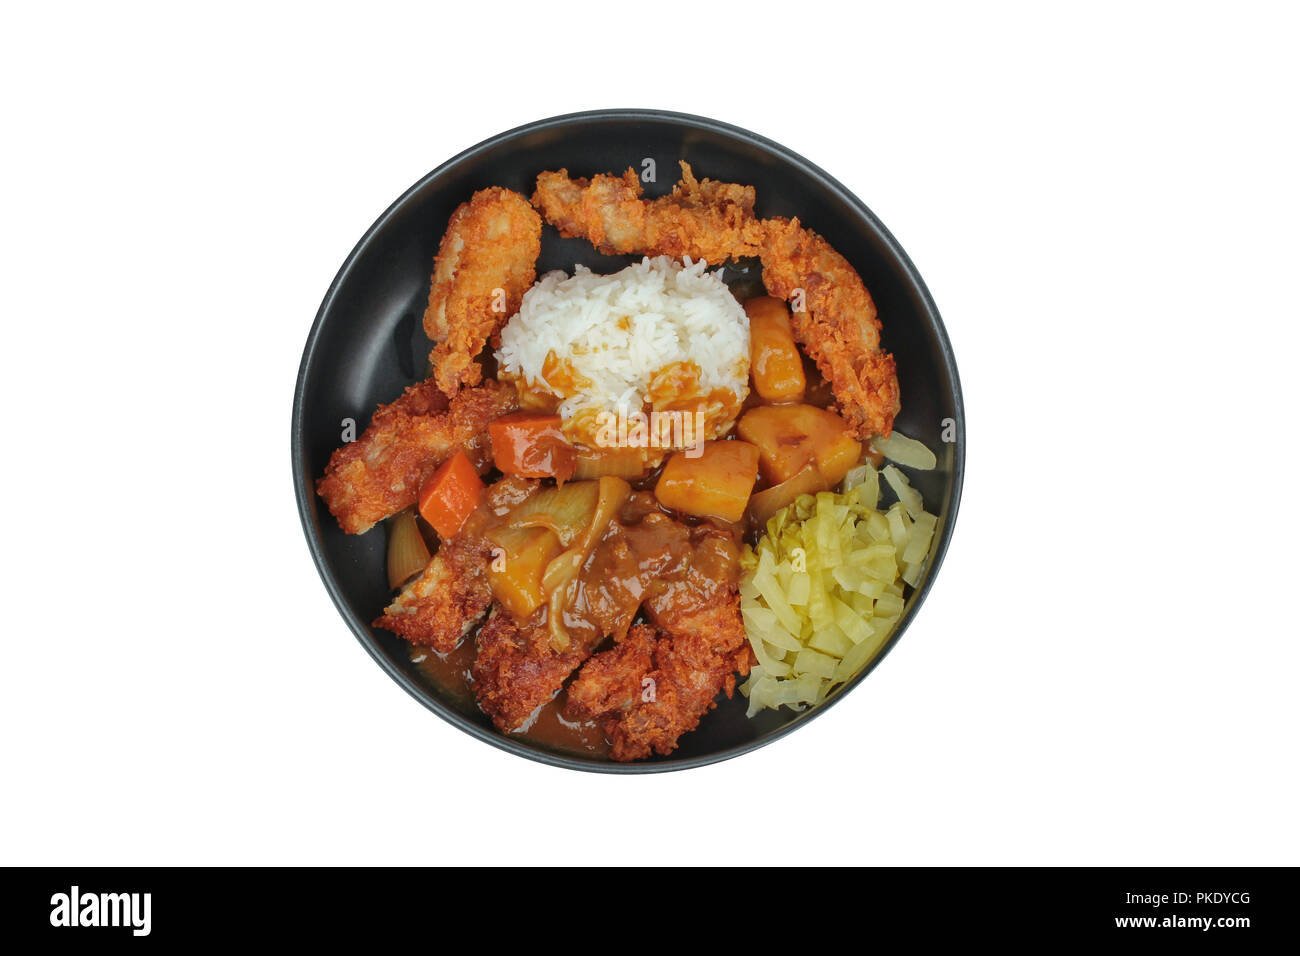 https://c8.alamy.com/comp/PKDYCG/isolated-of-rice-with-deep-fried-chickensliced-picklesl-topped-japanese-yellow-curry-PKDYCG.jpg